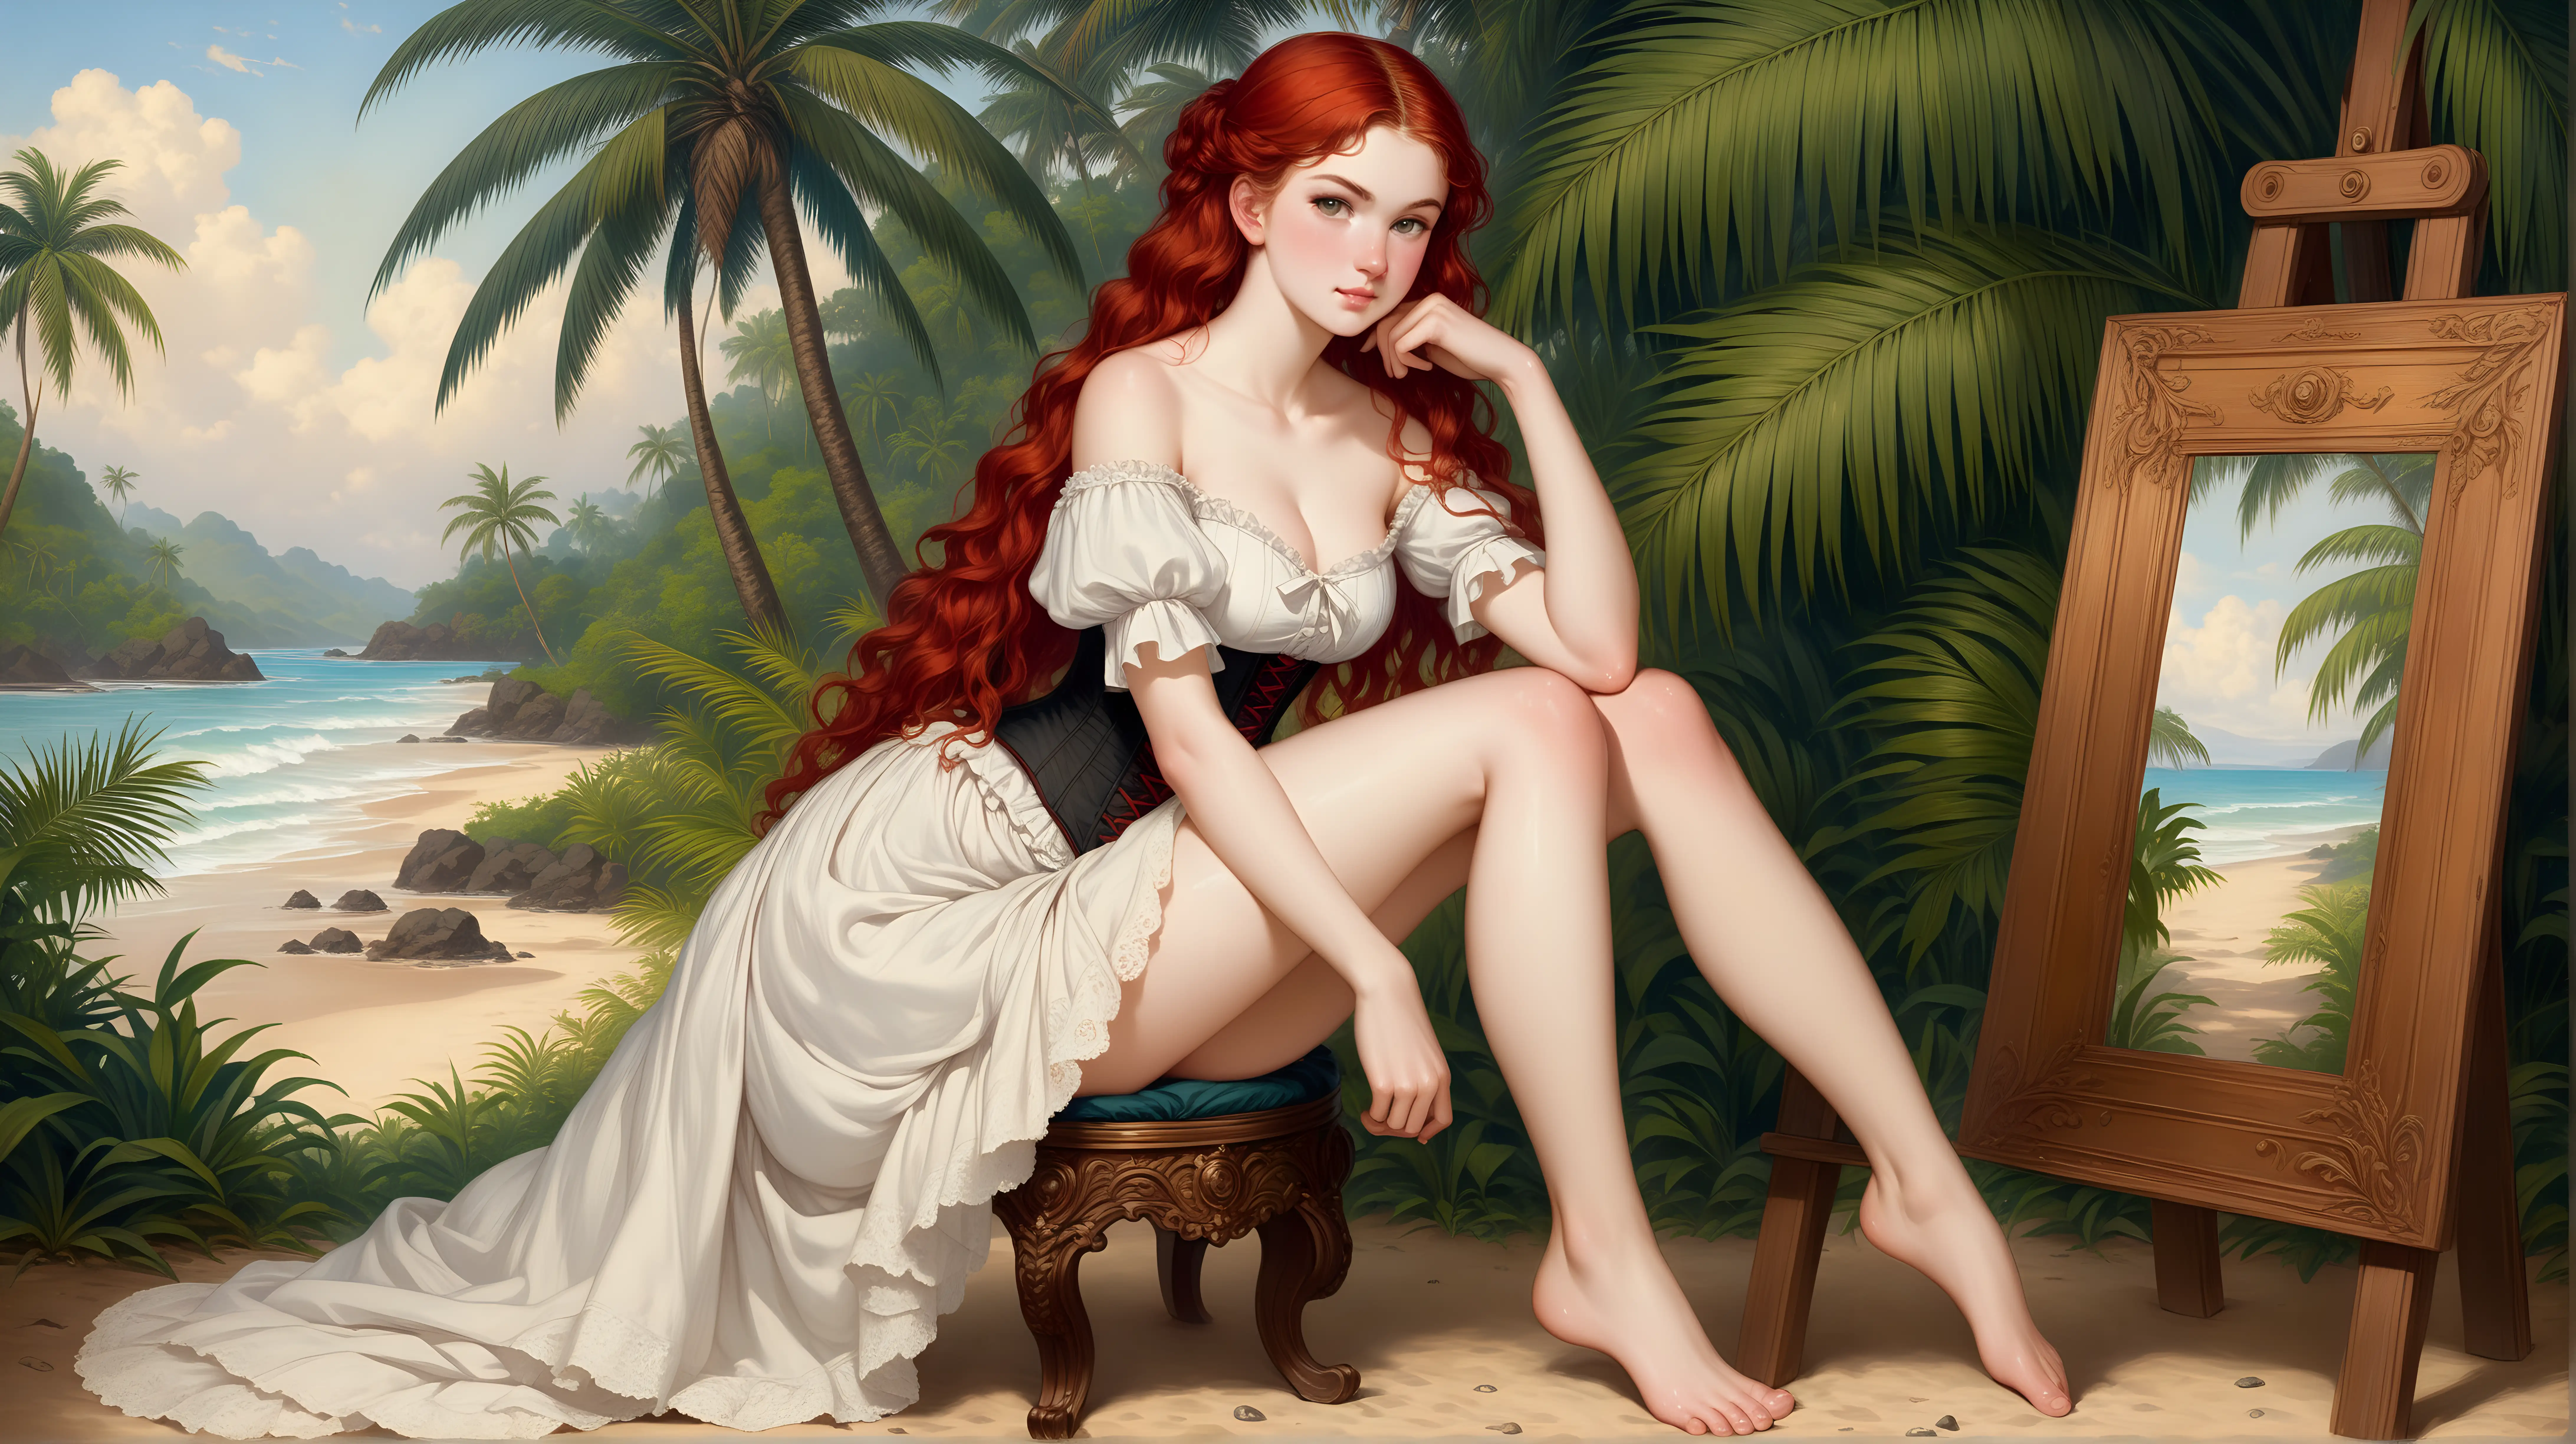 22 year old Young British wife 1880s,  in the tropics, hot, sweaty skin, carte de visite, corset, very cute face, curly red hair, long legs, bare feet, full body portrait, highly detailed oil painting